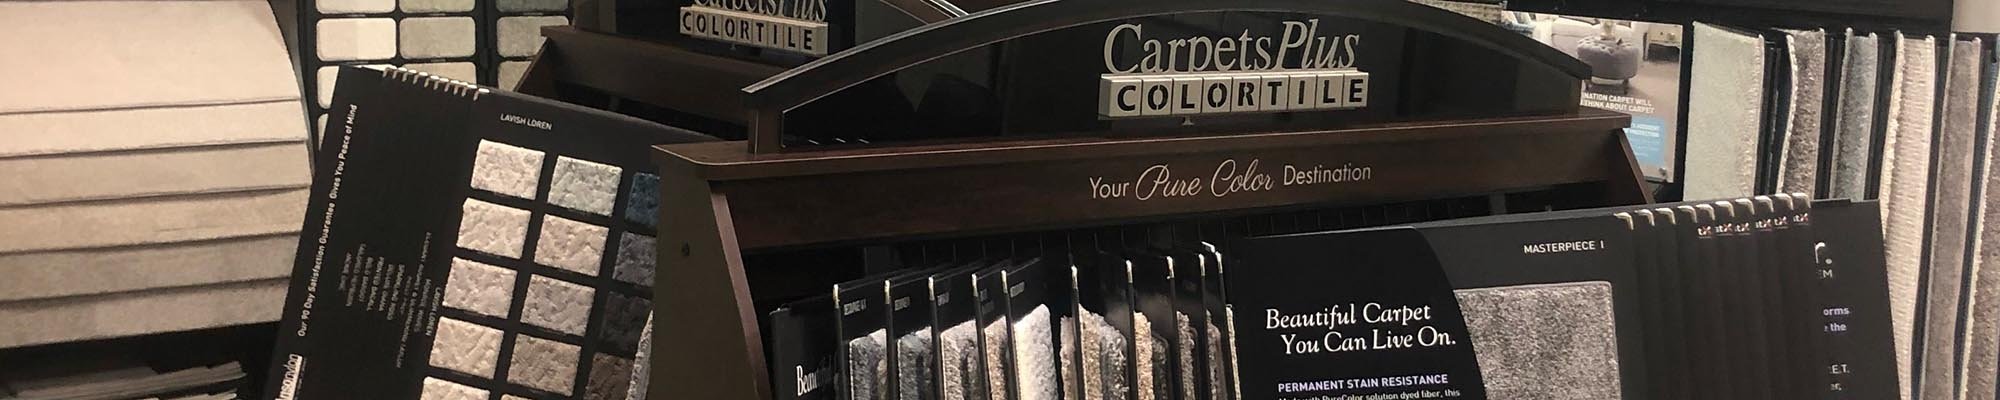 Local Flooring Retailer in Woodville, WI - CarpetsPlus by Design providing a wide selection of flooring and expert advice.